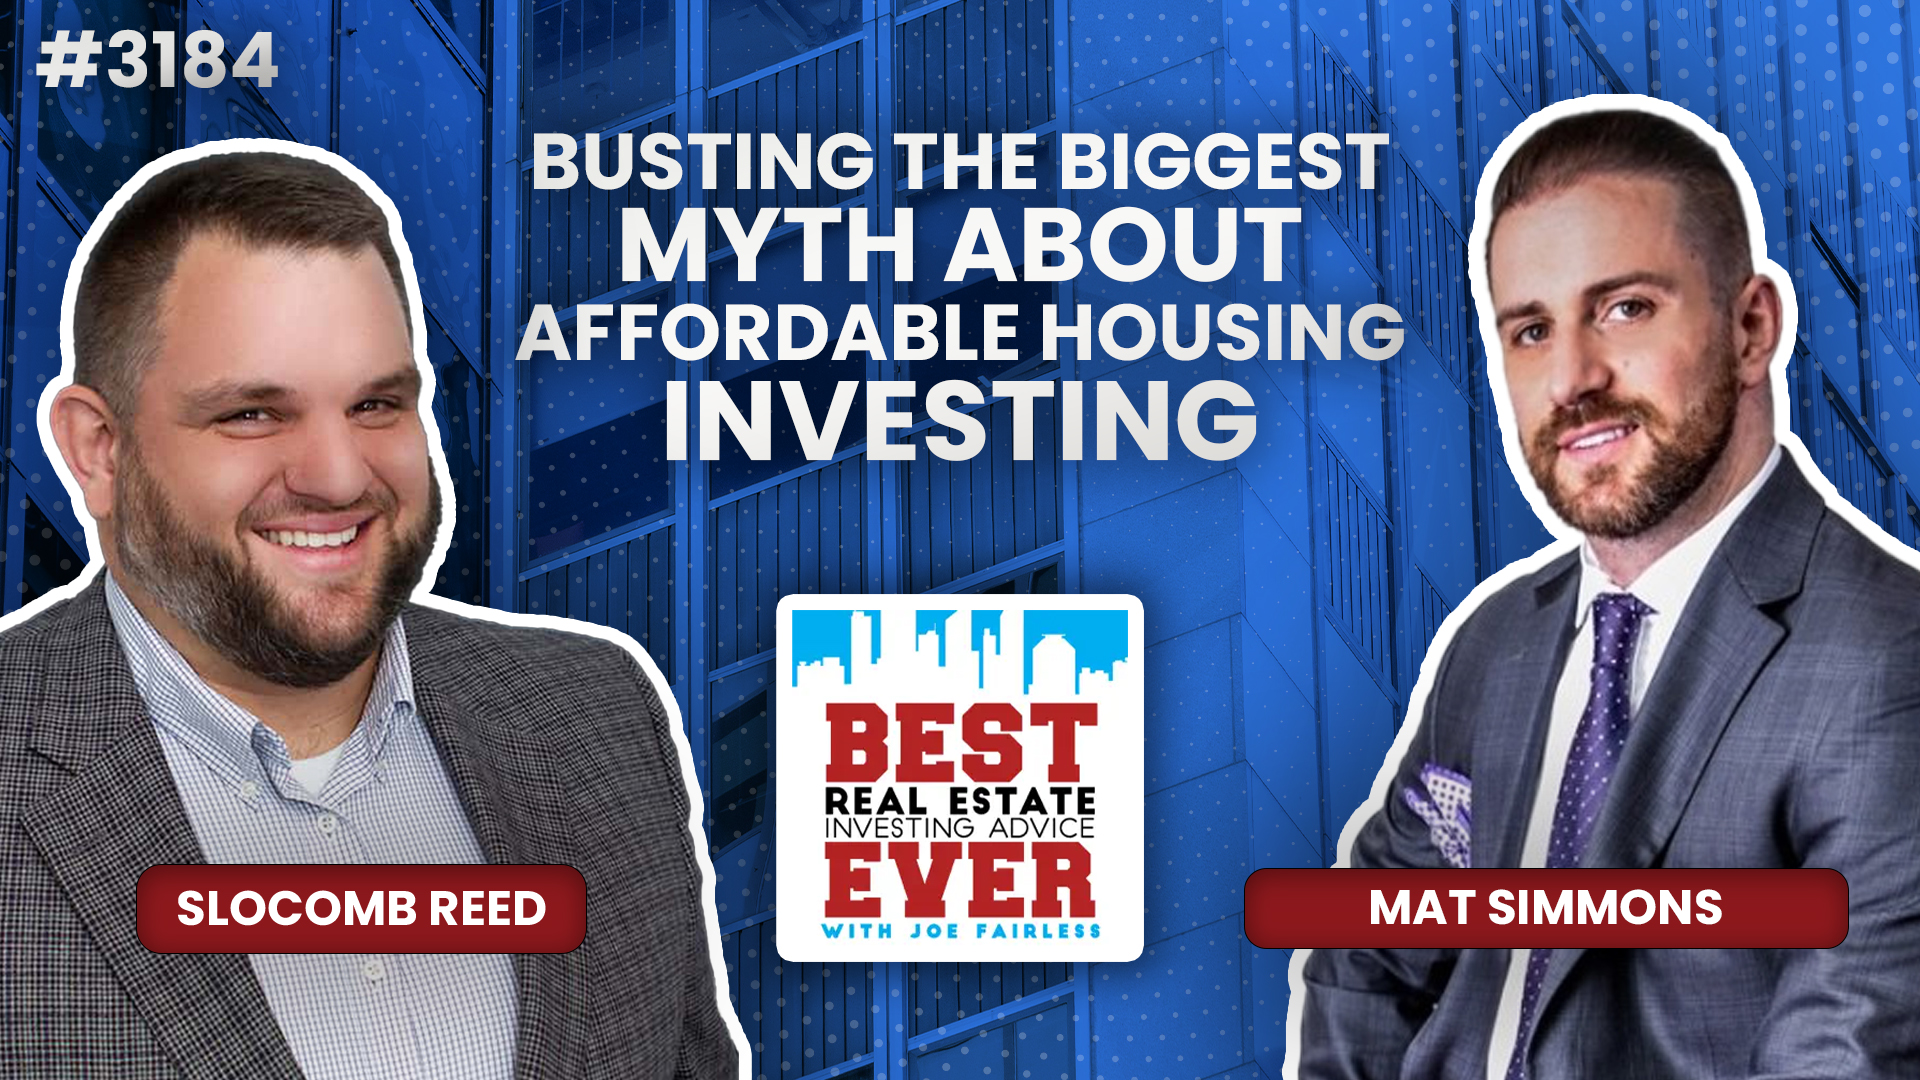 JF3184: Busting the Biggest Myth About Affordable Housing Investing ft. Mat Simmons